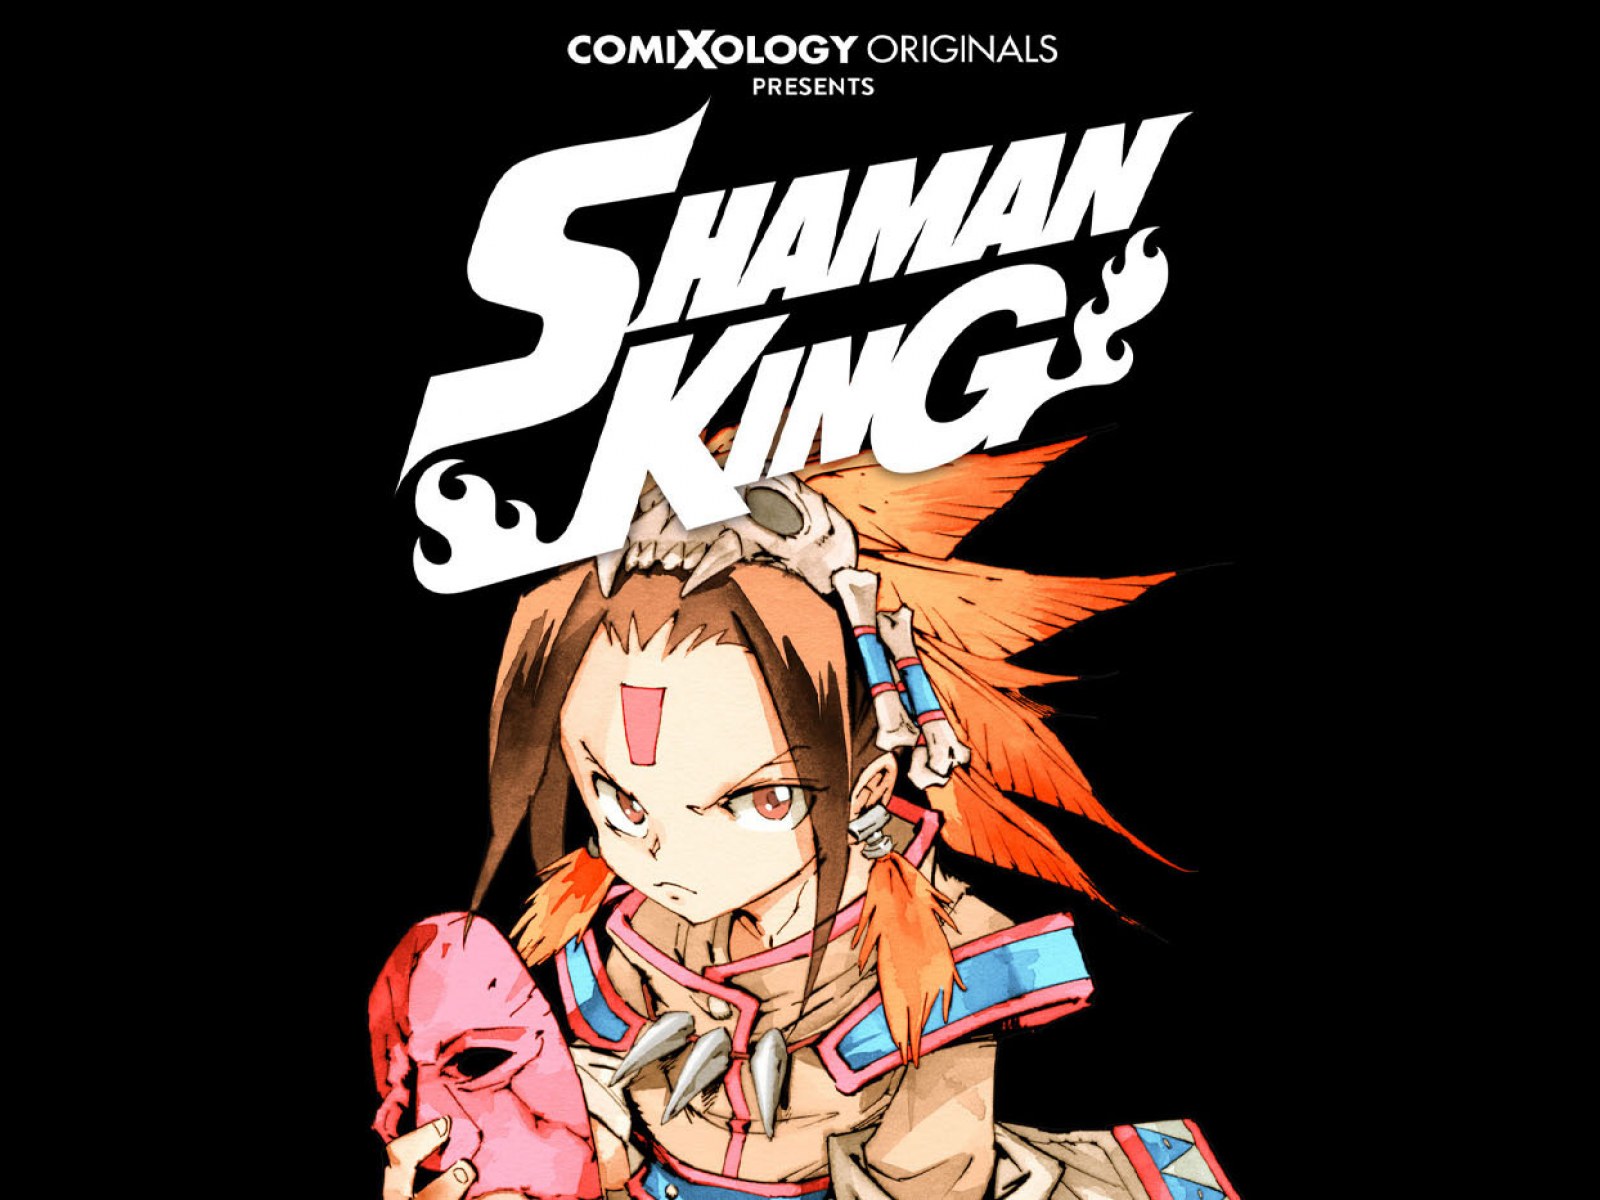 Shaman King' Manga Never-Before Released in English Coming to